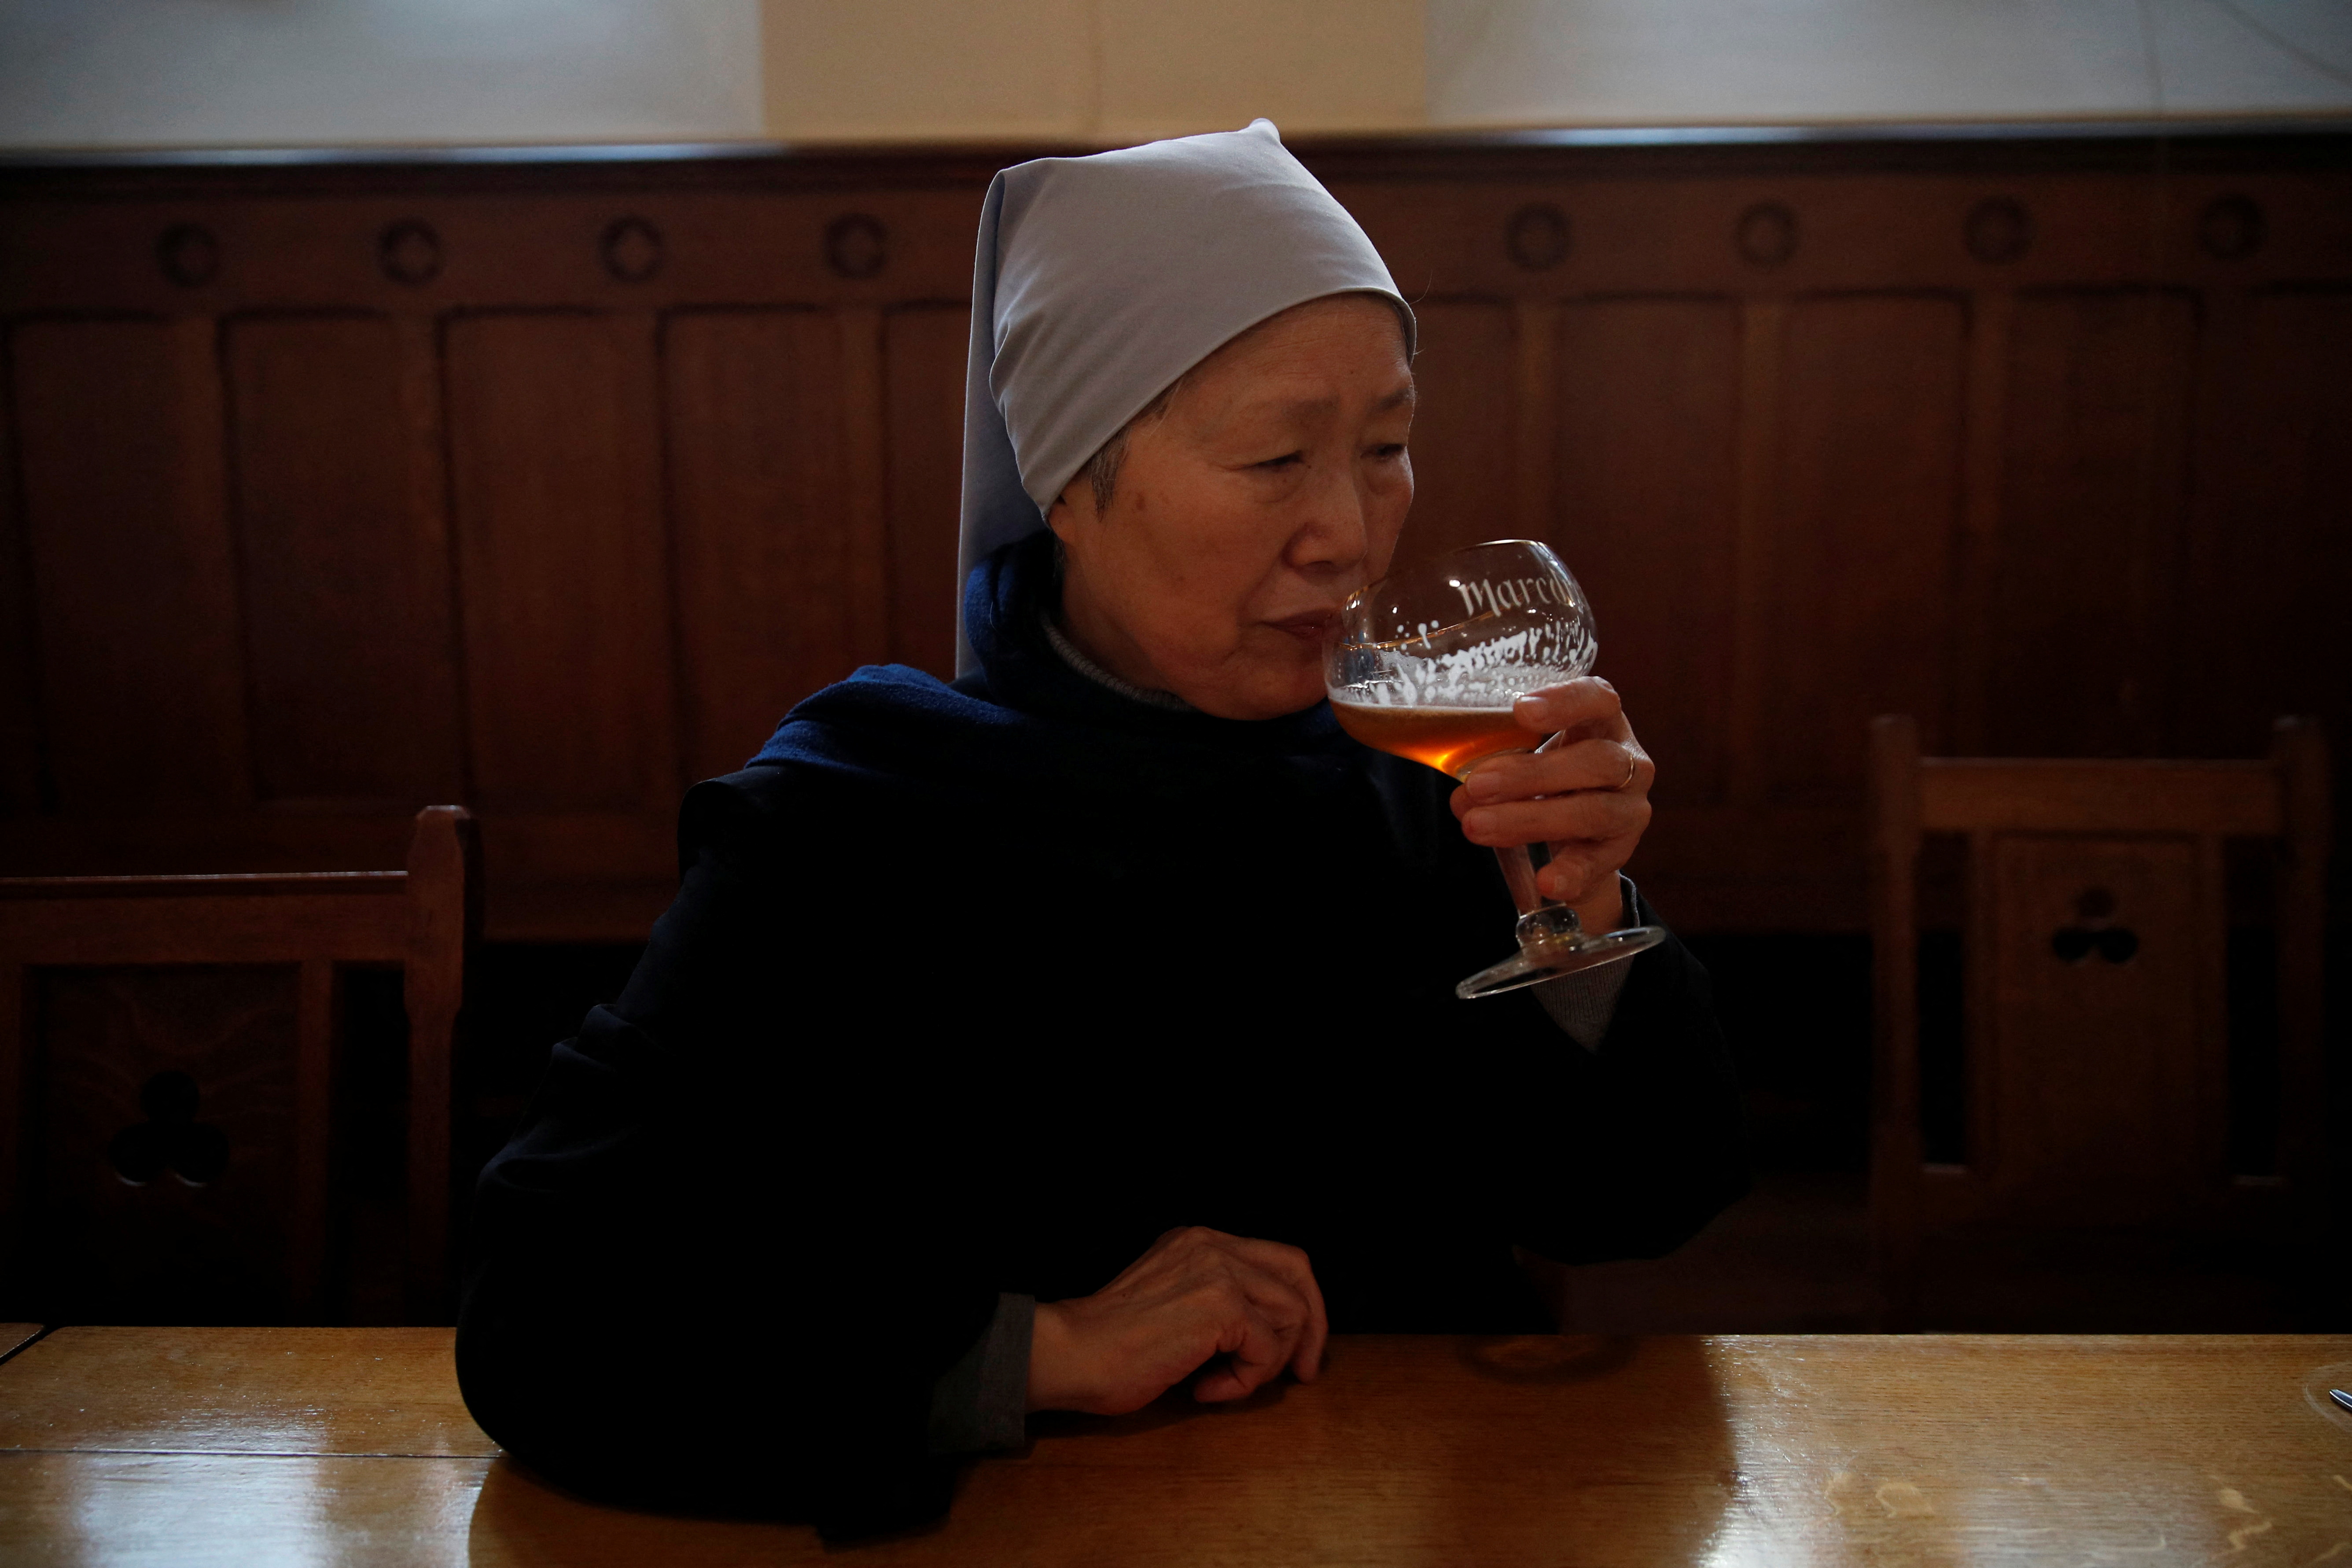 After centuries, Belgian nuns join monks in beer production